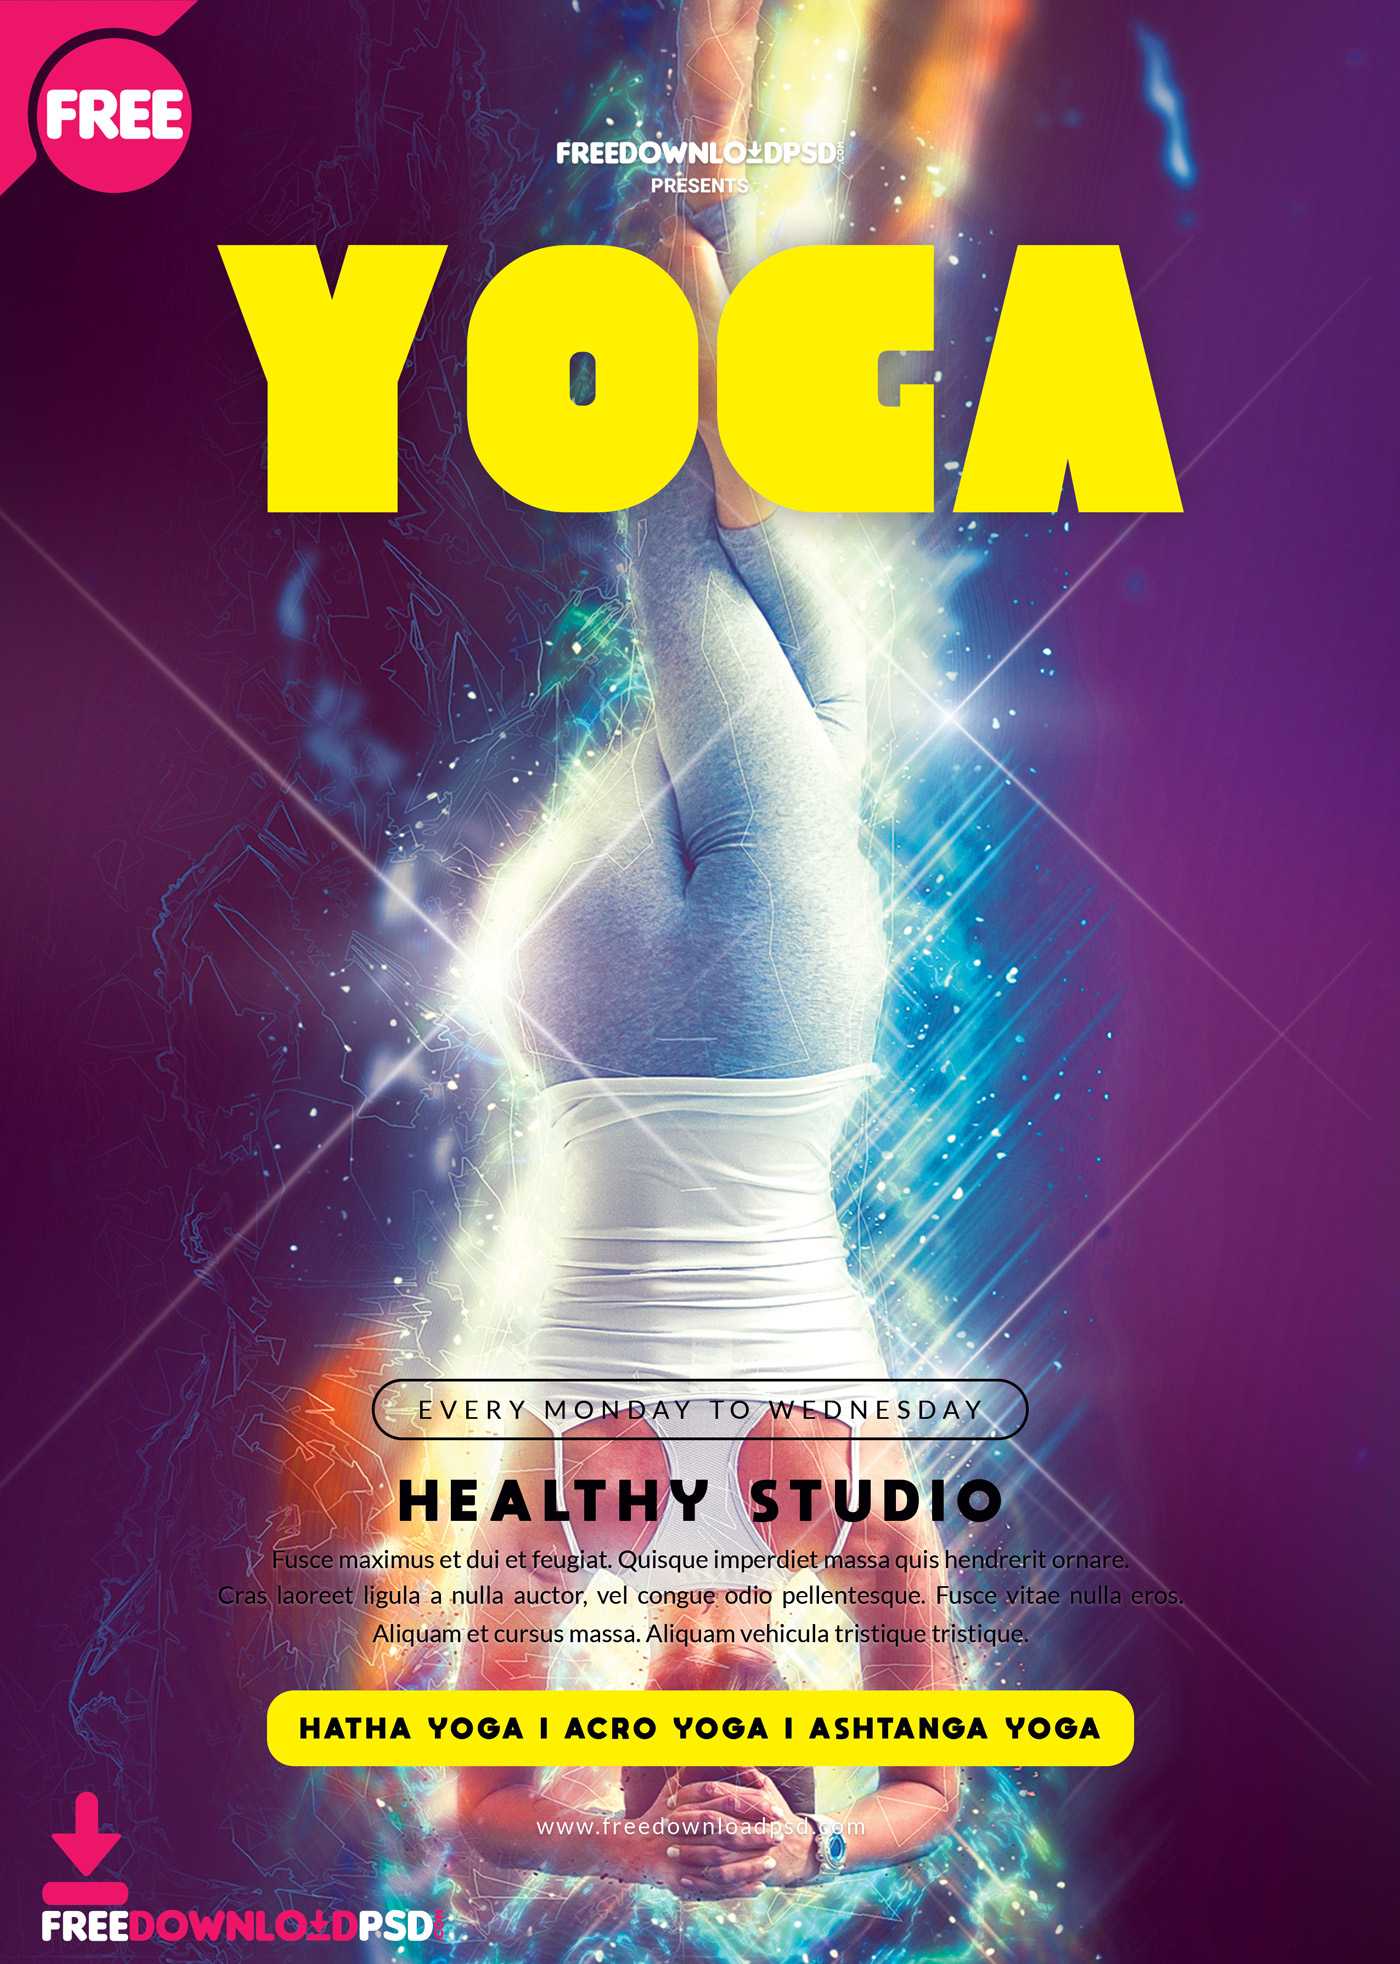 018 Free Event Flyer Templates Word Template Ideas Yoga With Regard To Free Event Flyer Templates Word